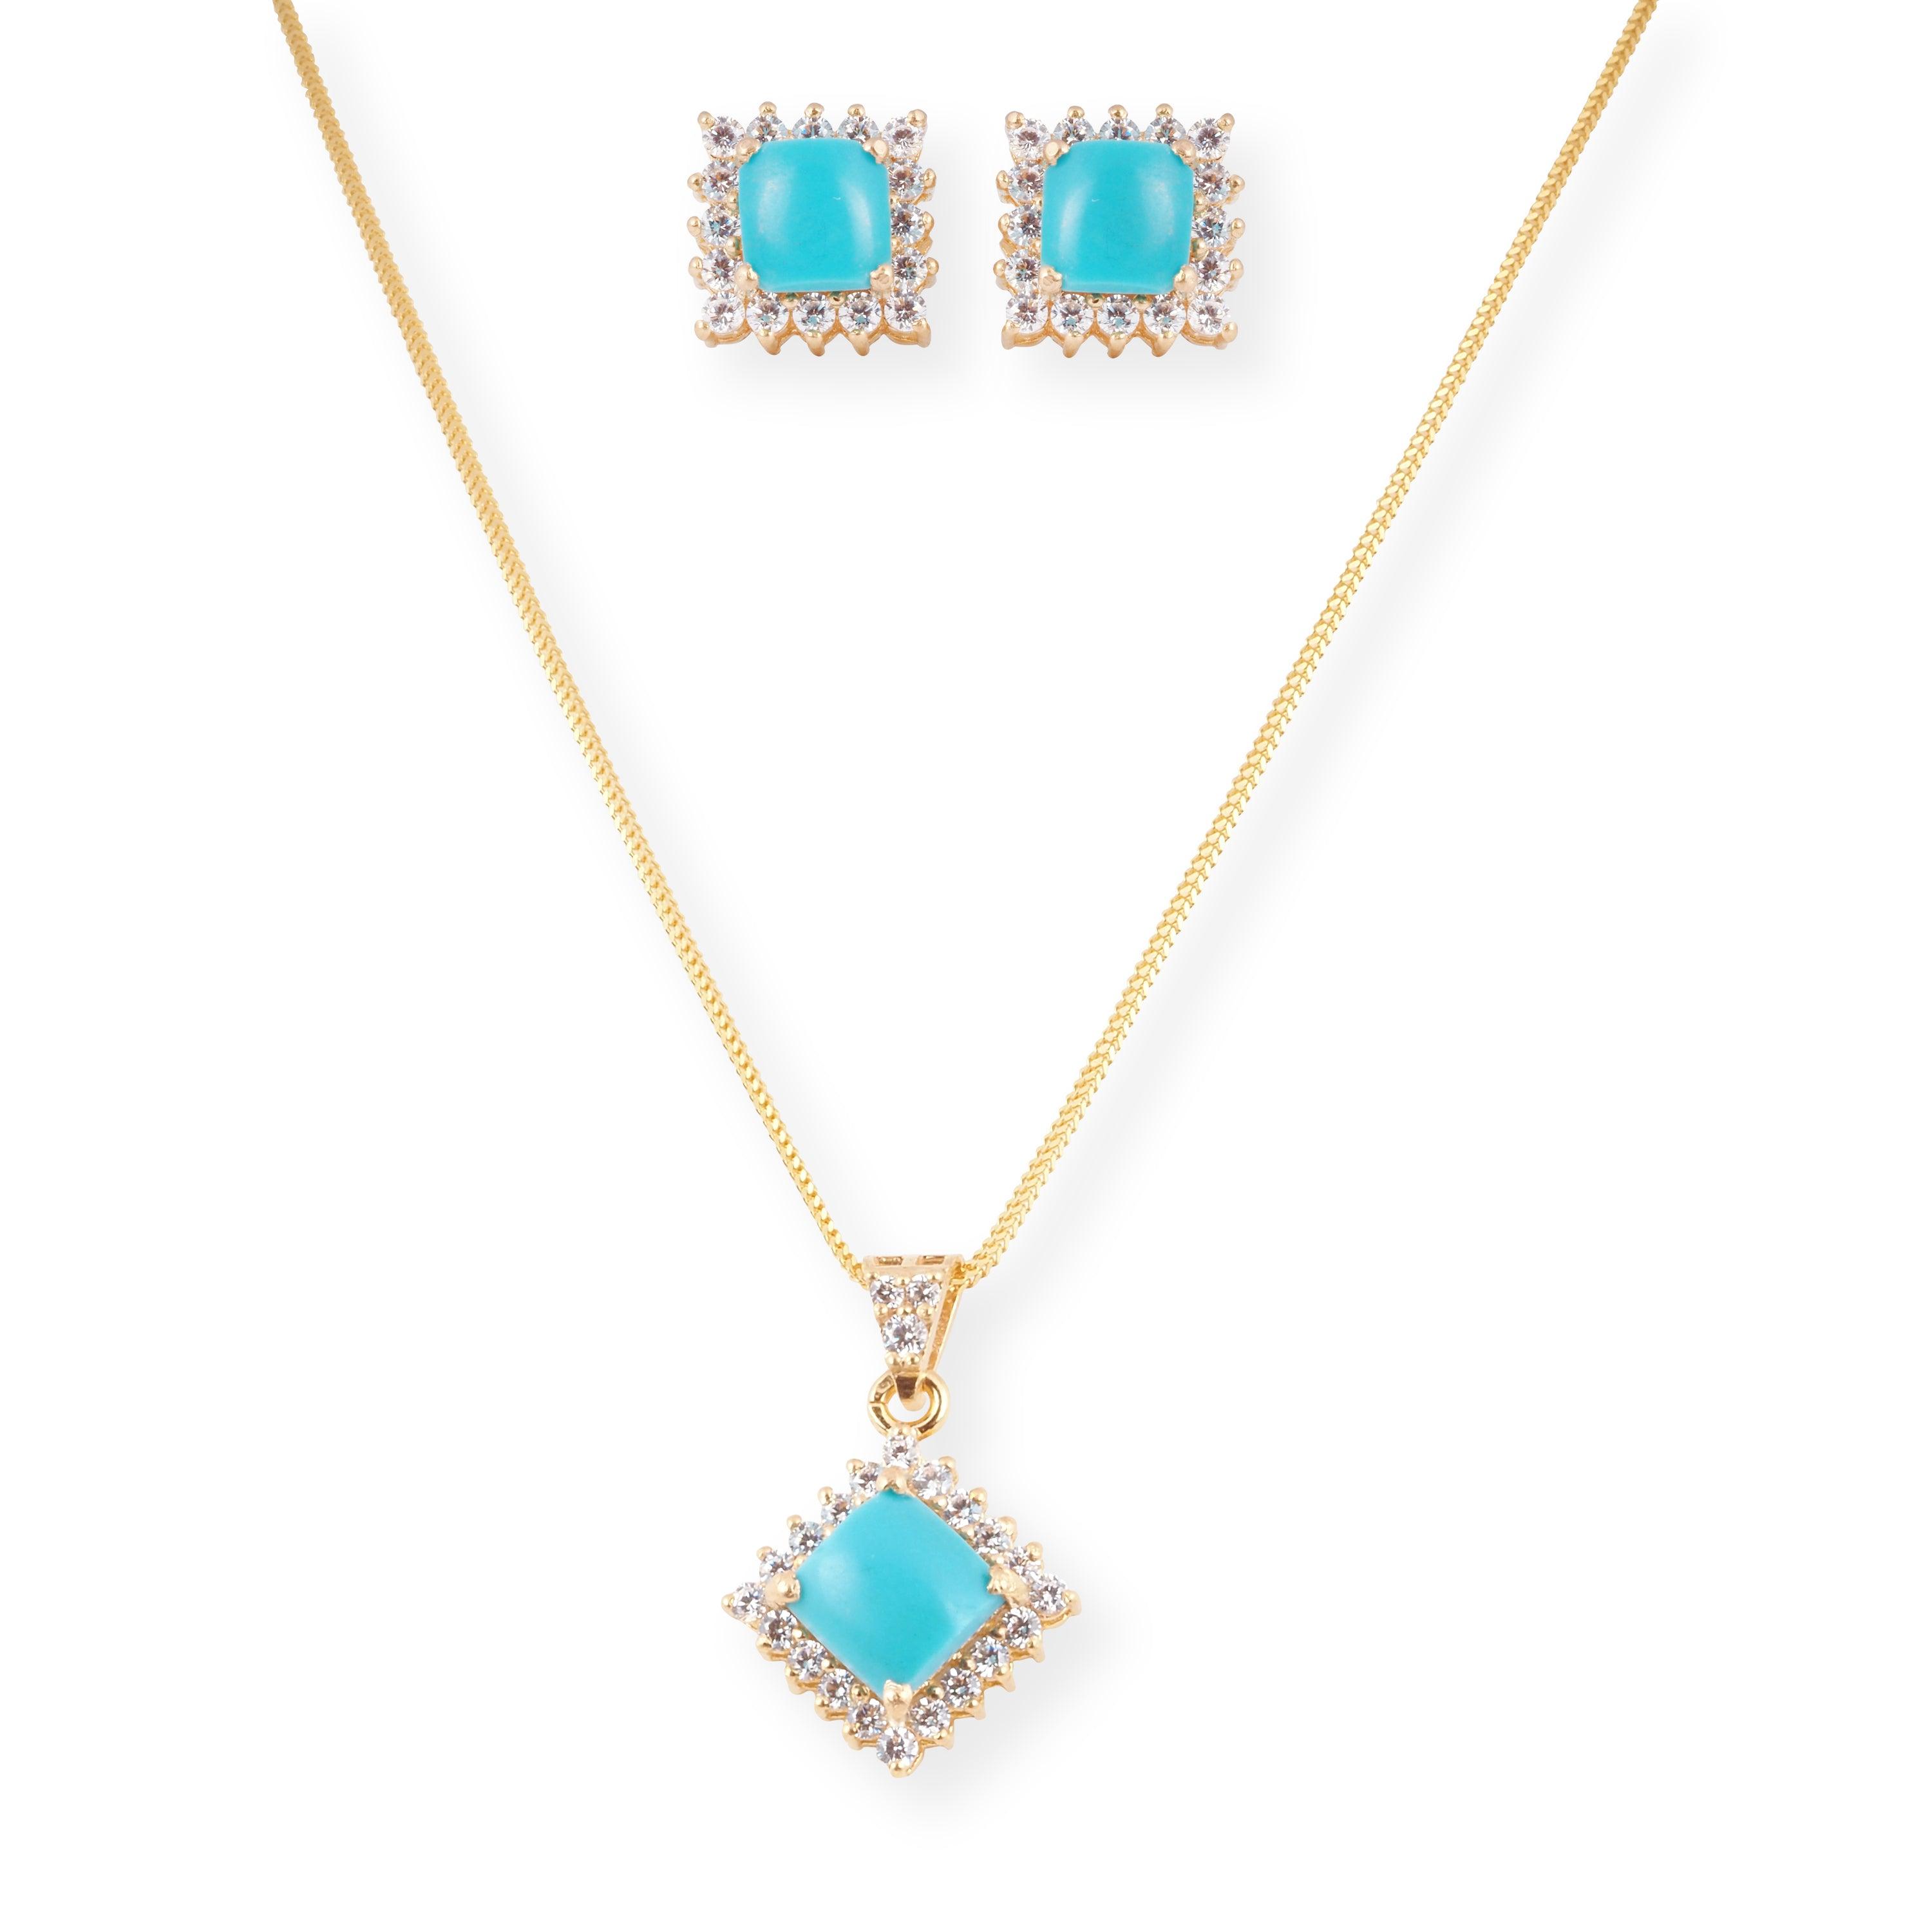 22ct Gold Set with Turquoise and Cubic Zirconia Stones (Pendant + Chain + Earrings) P-8006 E-8006A - Minar Jewellers